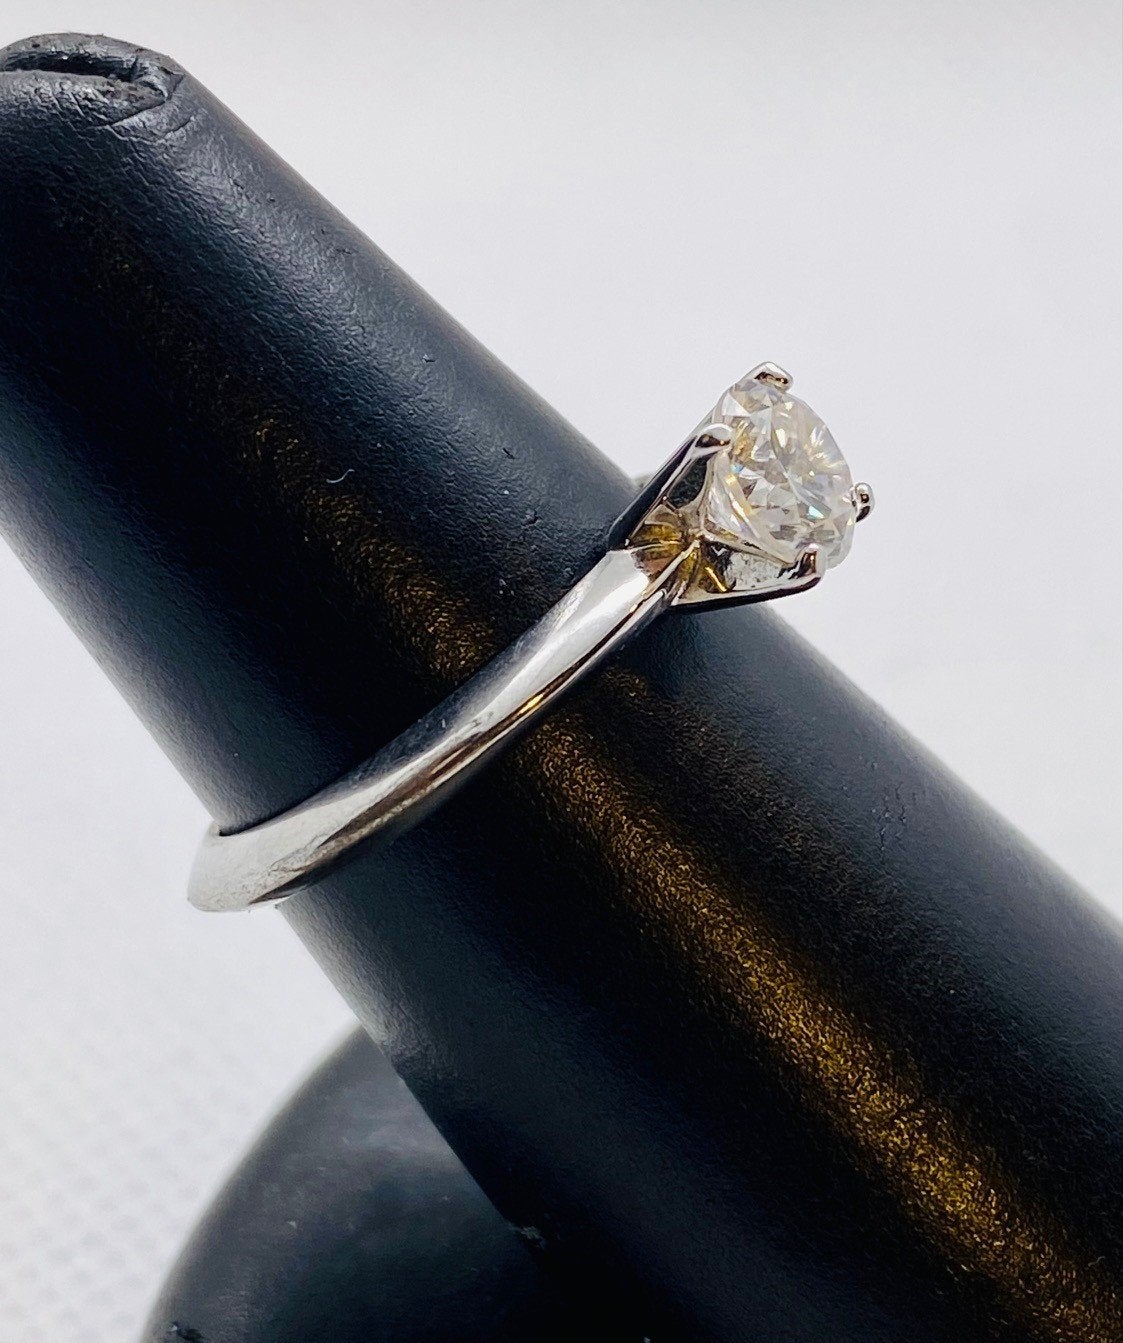 Estate Jewelry Silver Engagement CZ Ring - Size 6 3/4